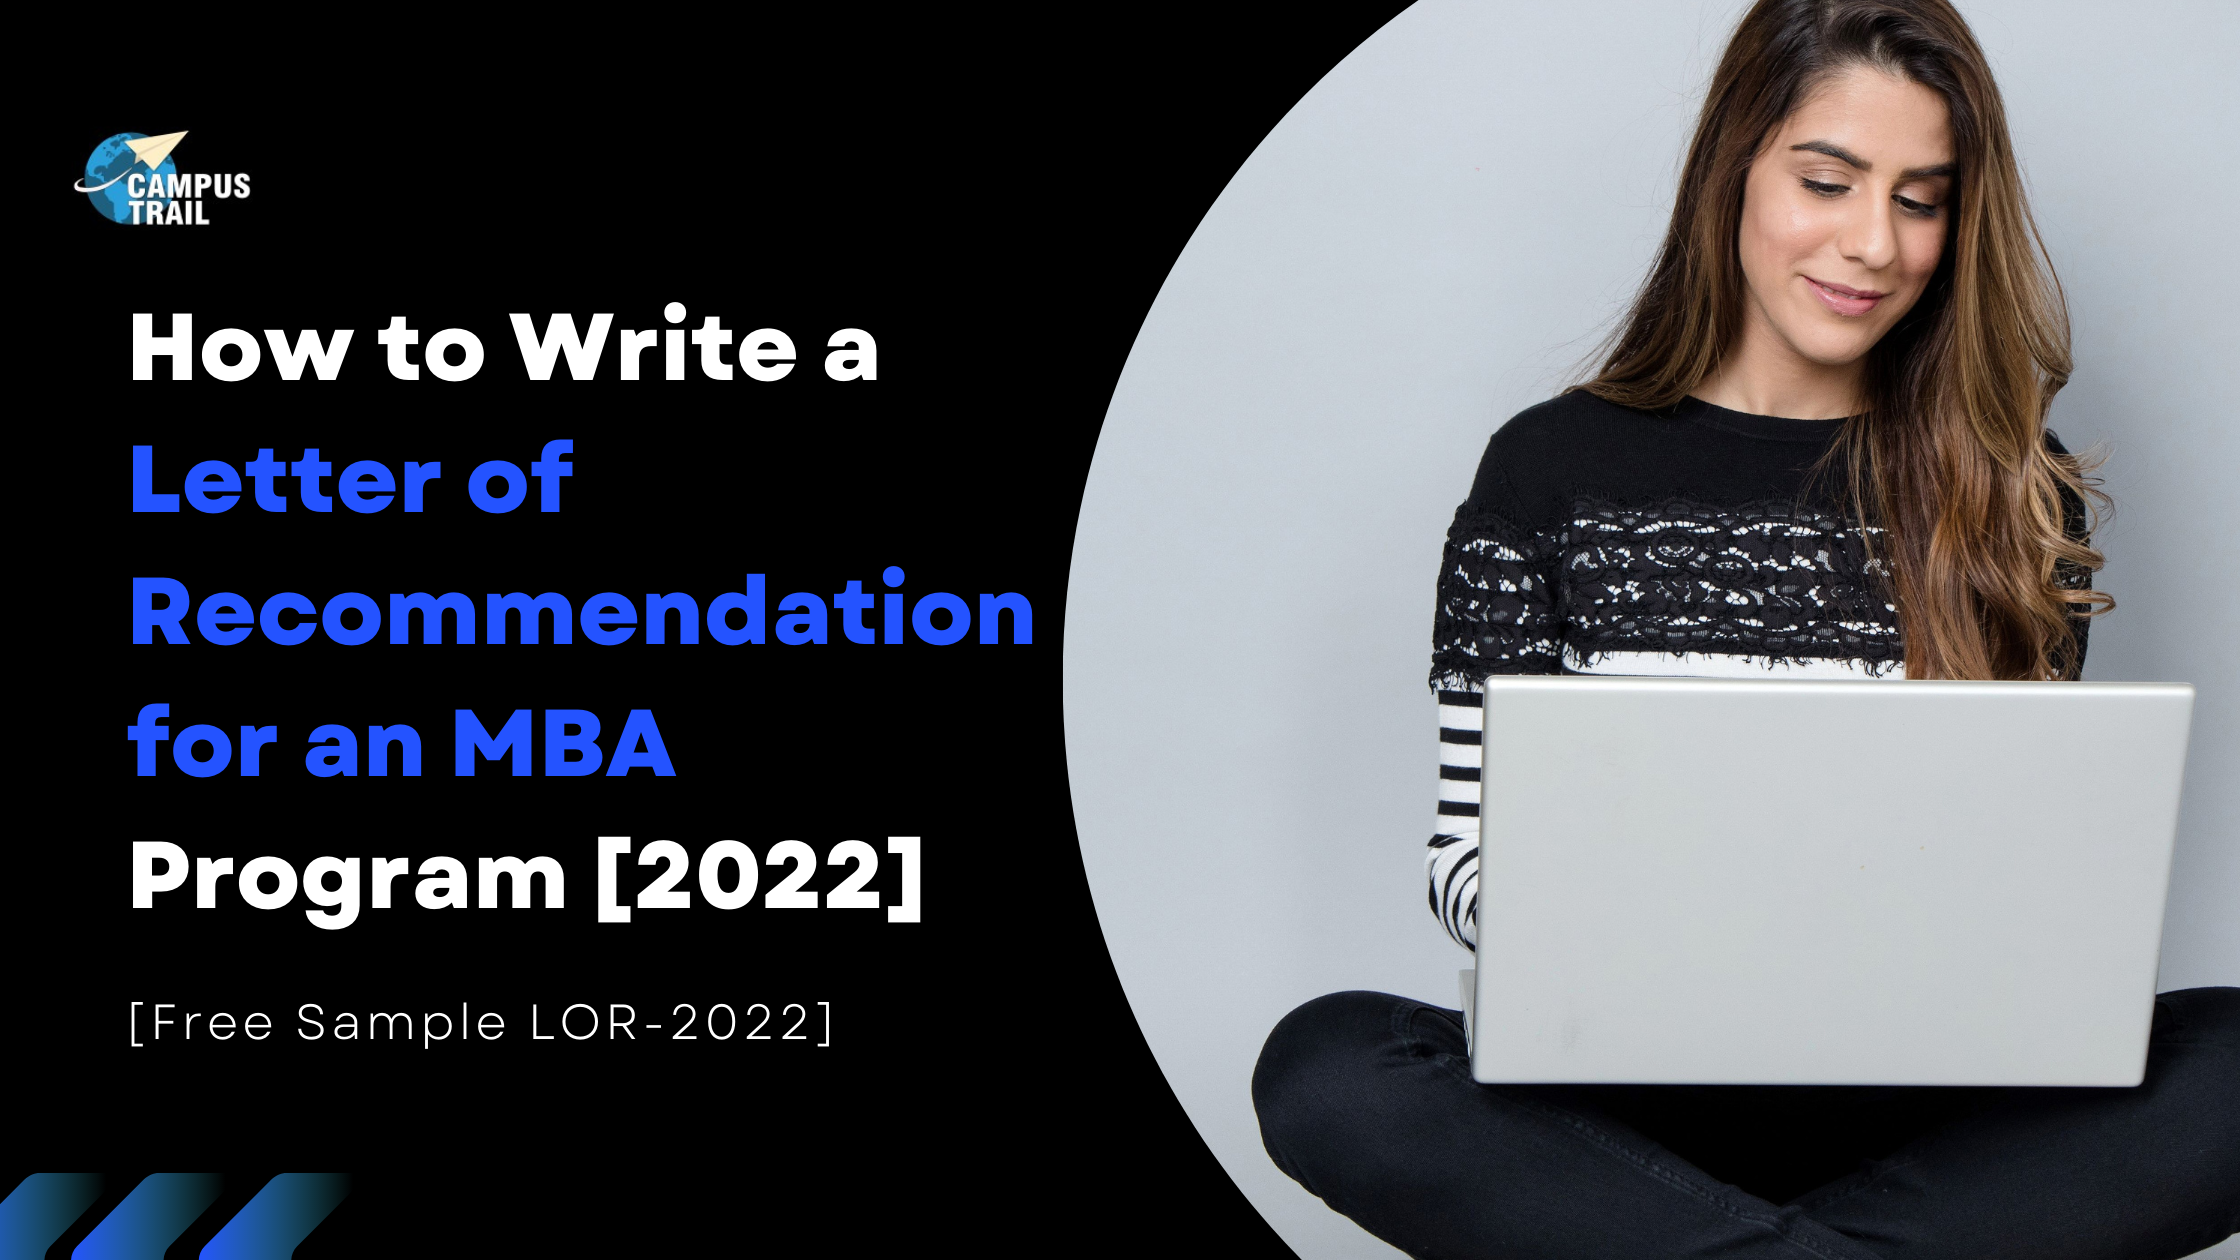 You are currently viewing How to Write a Letter of Recommendation for an MBA Program [2022]